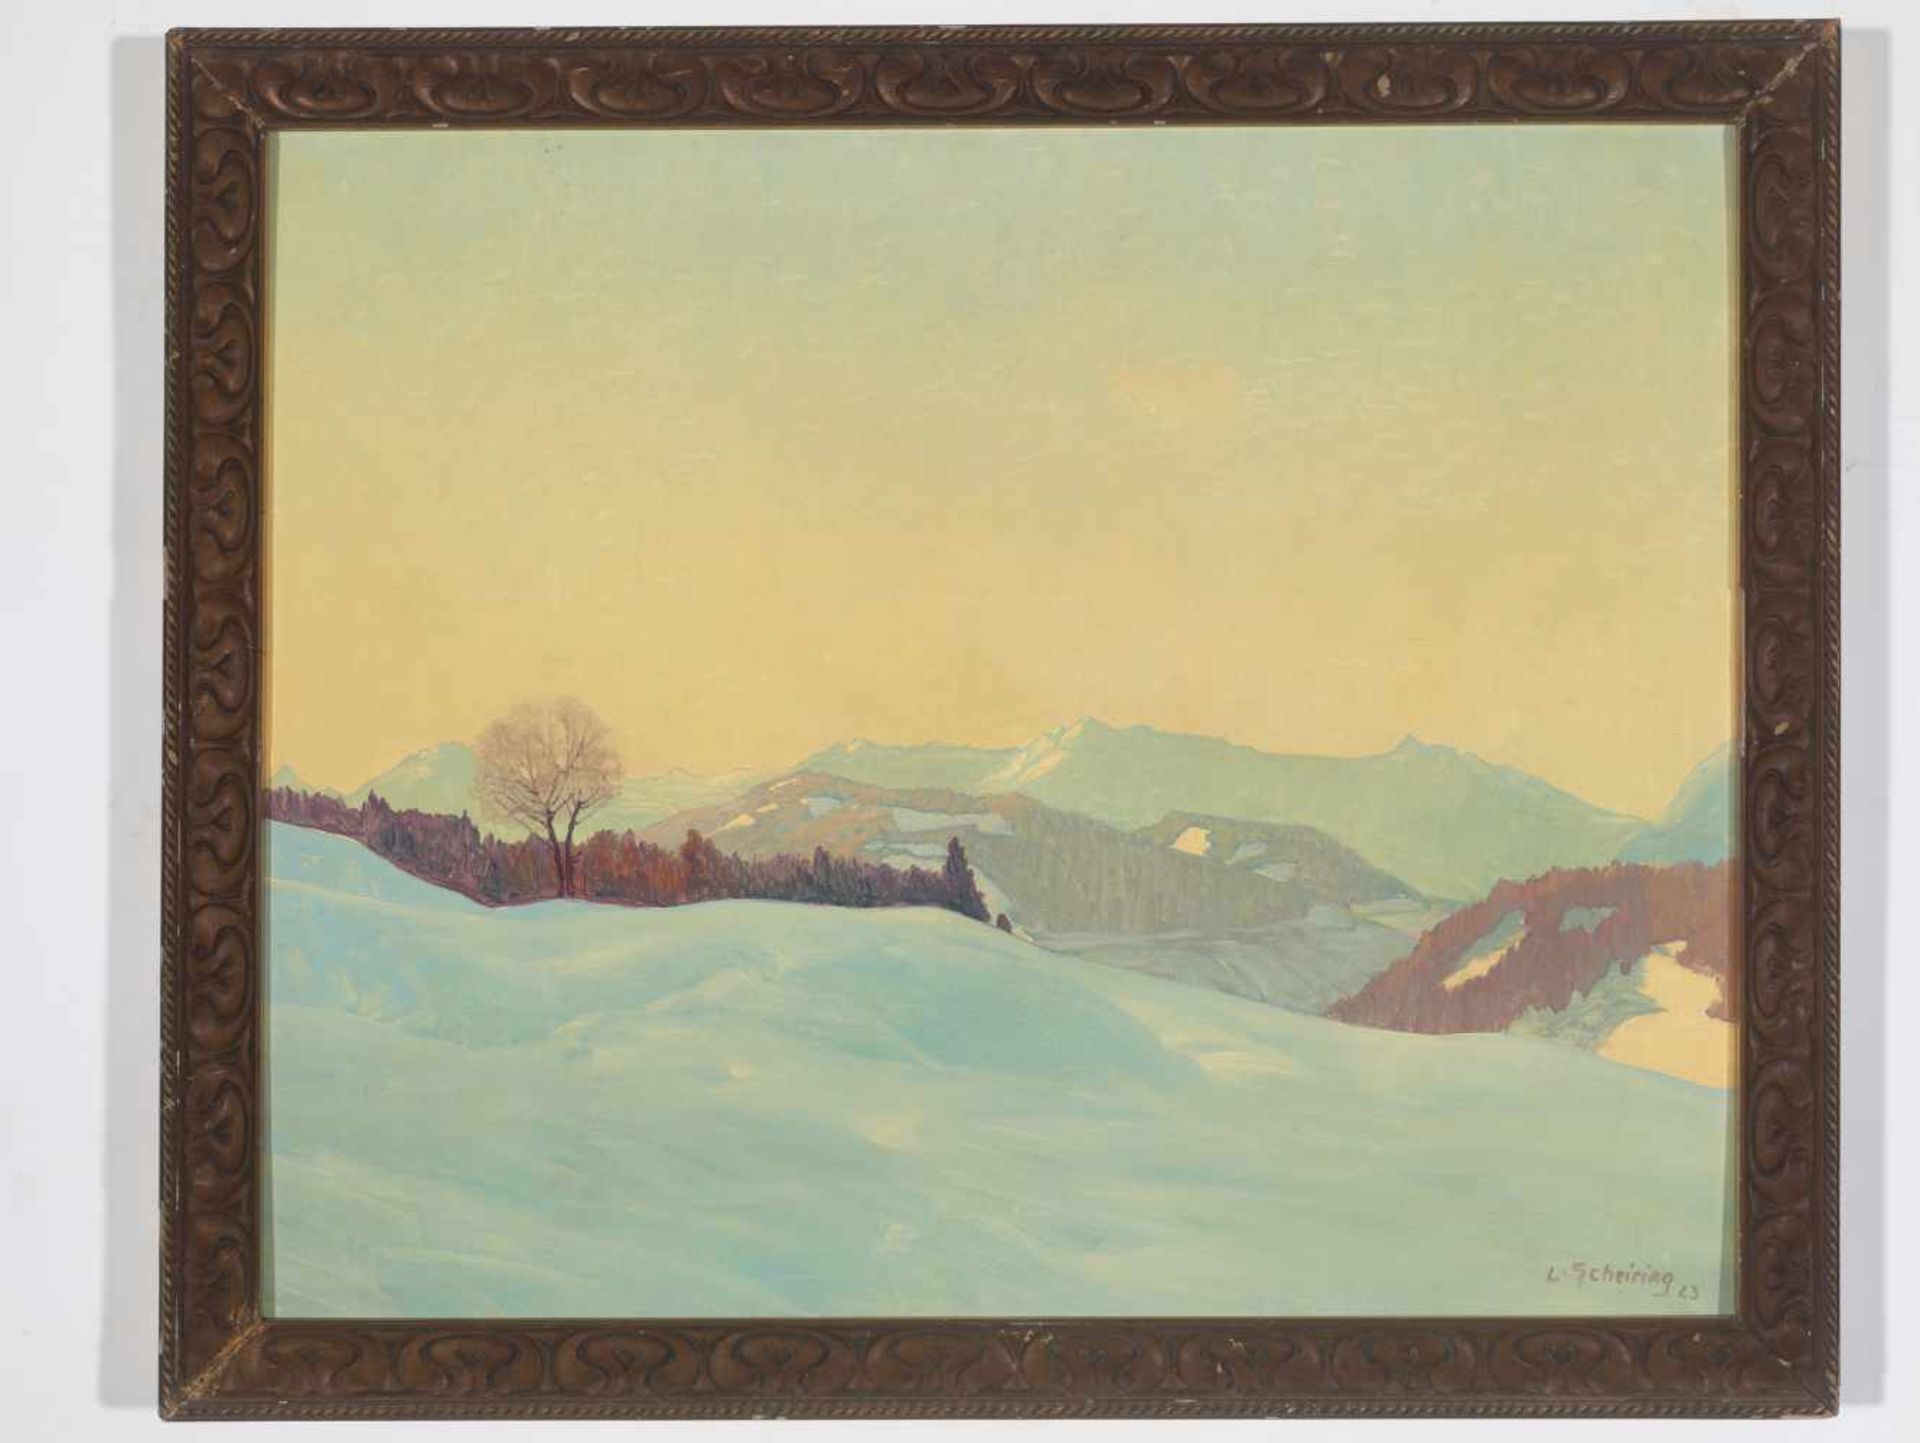 LEOPOLD SCHEIRING (1884-1927), OIL PAINTING ‘SNOWY MOUNTAINS’ 1923Leopold Scheiring (1884-1927)Oil - Image 3 of 9